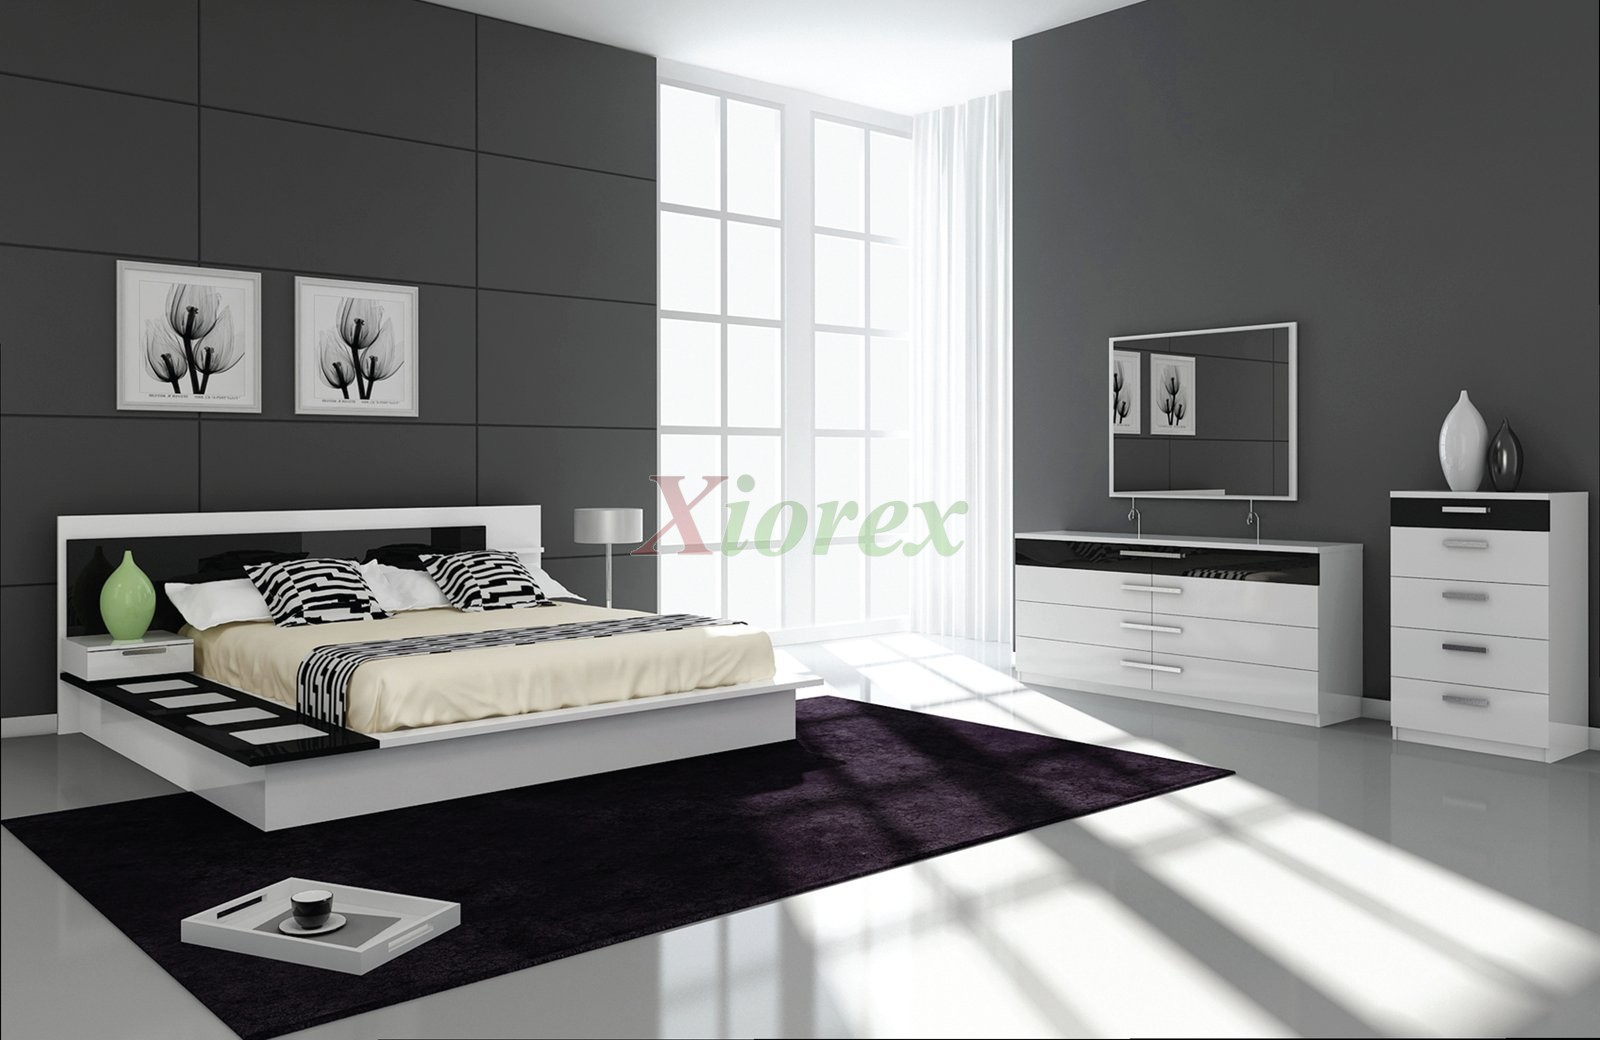 Draco Black And White Contemporary Bedroom Furniture Sets Xiorex with regard to measurements 1600 X 1040